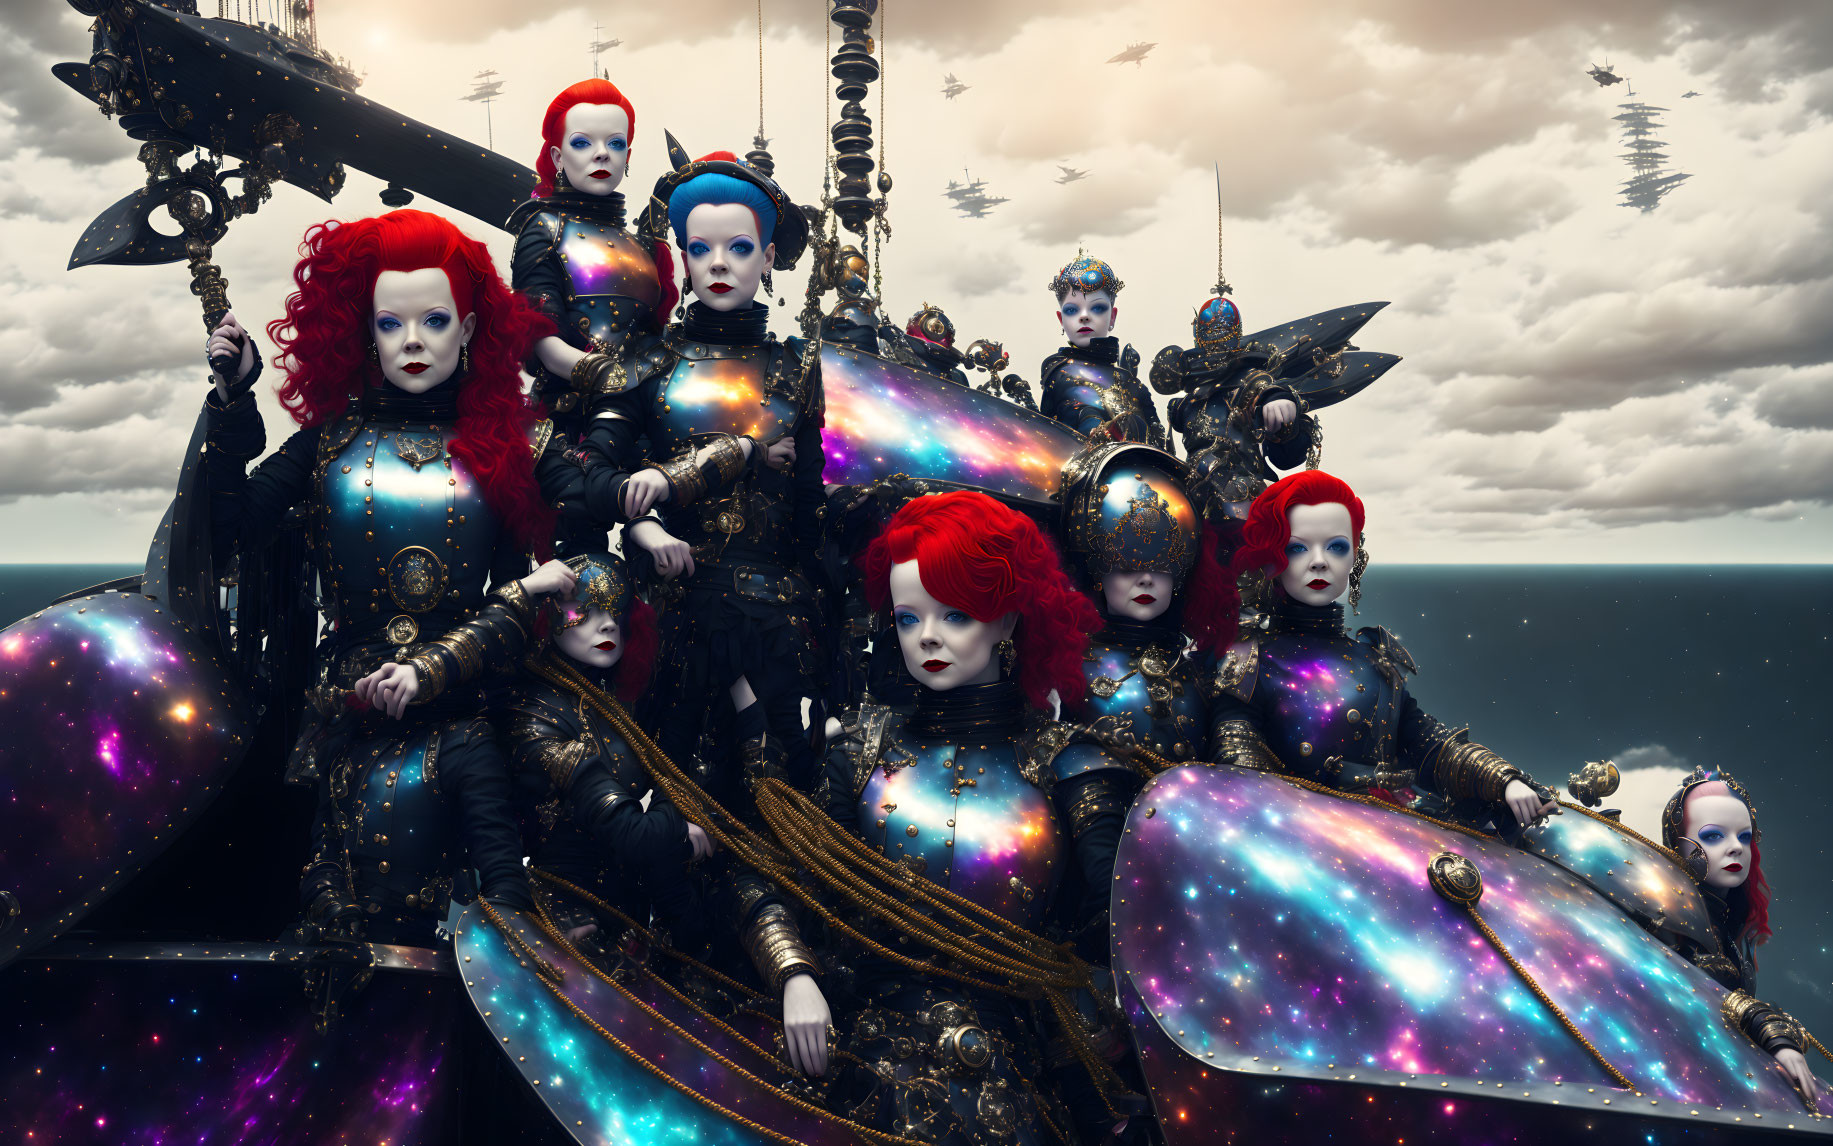 Cosmic-themed doll-like figures on surreal ship with cloudy seascape